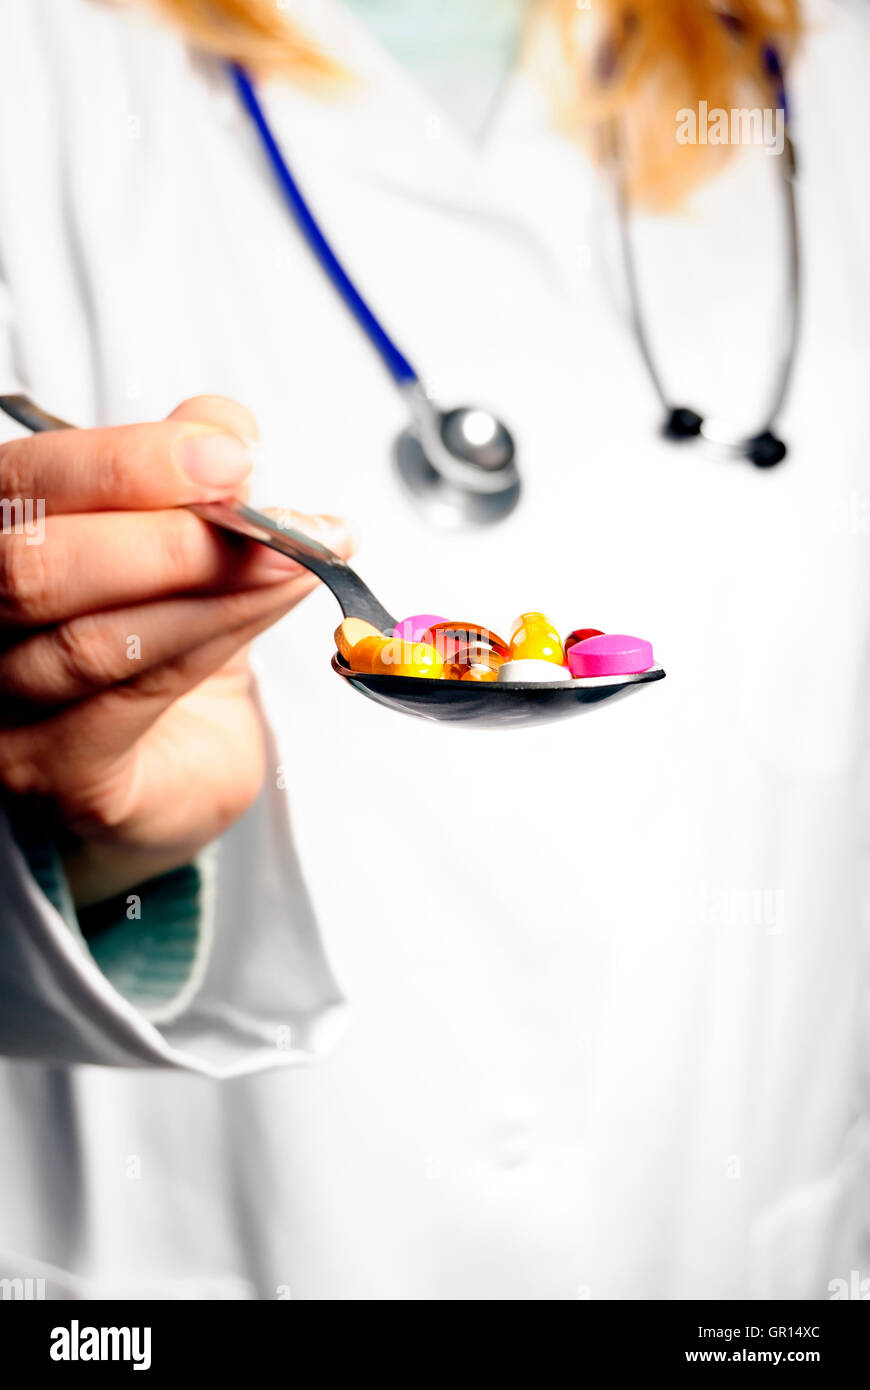 doctor handing a spoon of pills, nutritional supplements Stock Photo